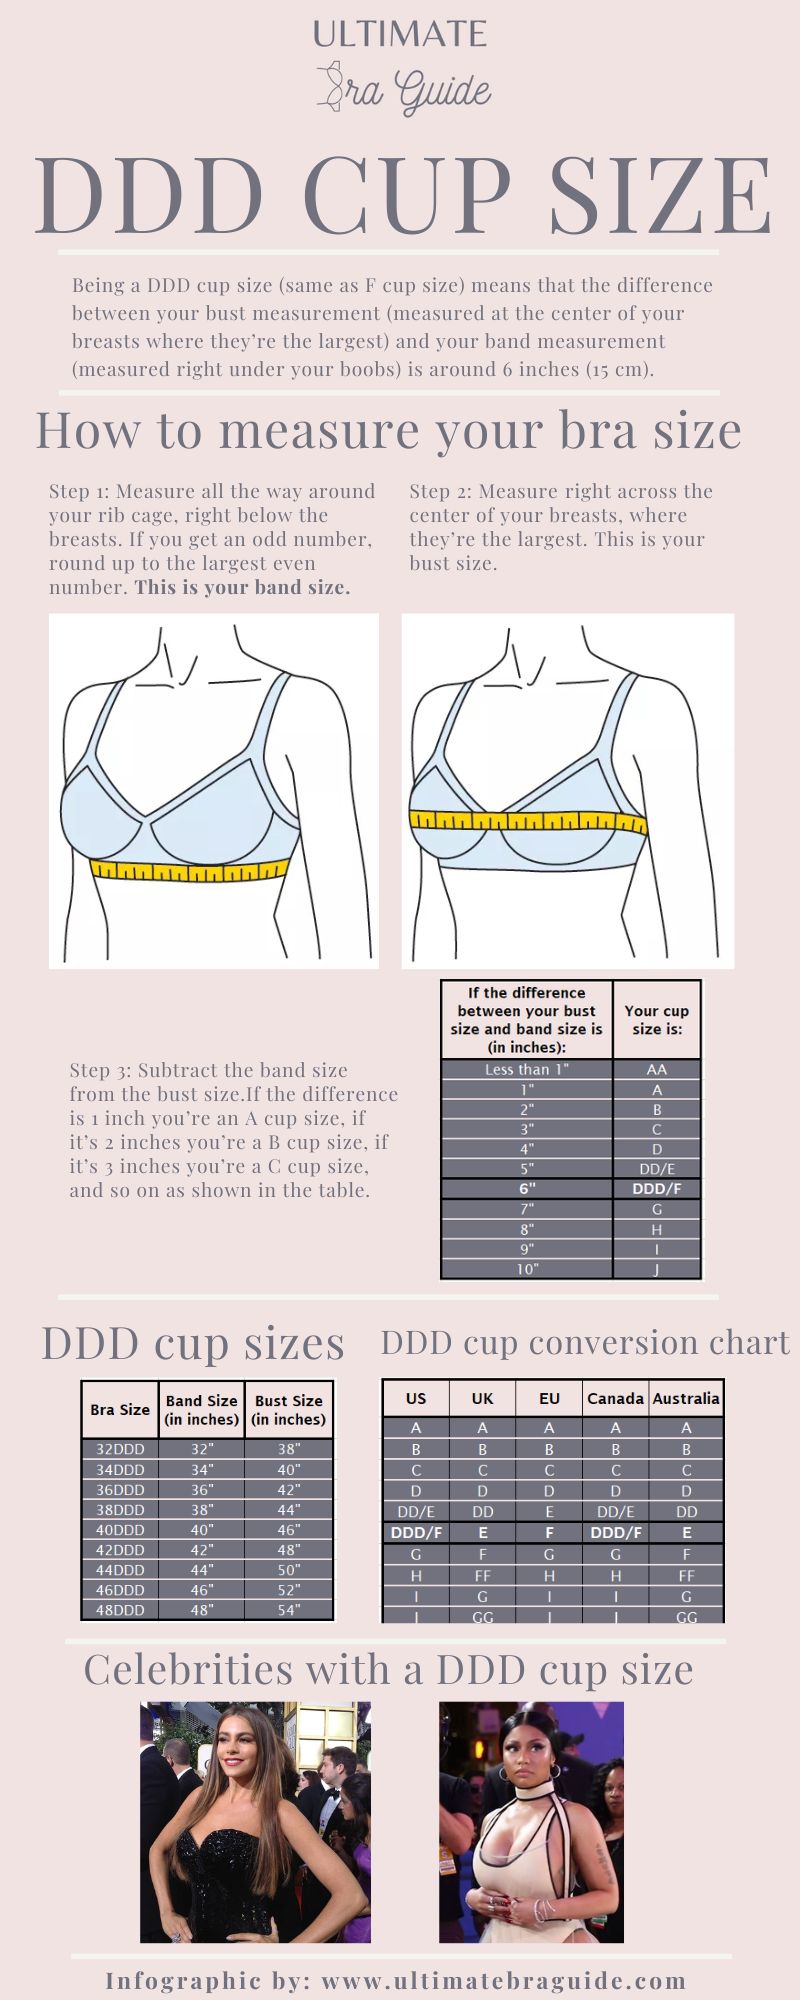 An infographic all about the DDD cup size (F cup size) - what it is, how to measure if you're DDD cup, a DDD cup conversion chart, DDD cup examples, and so on